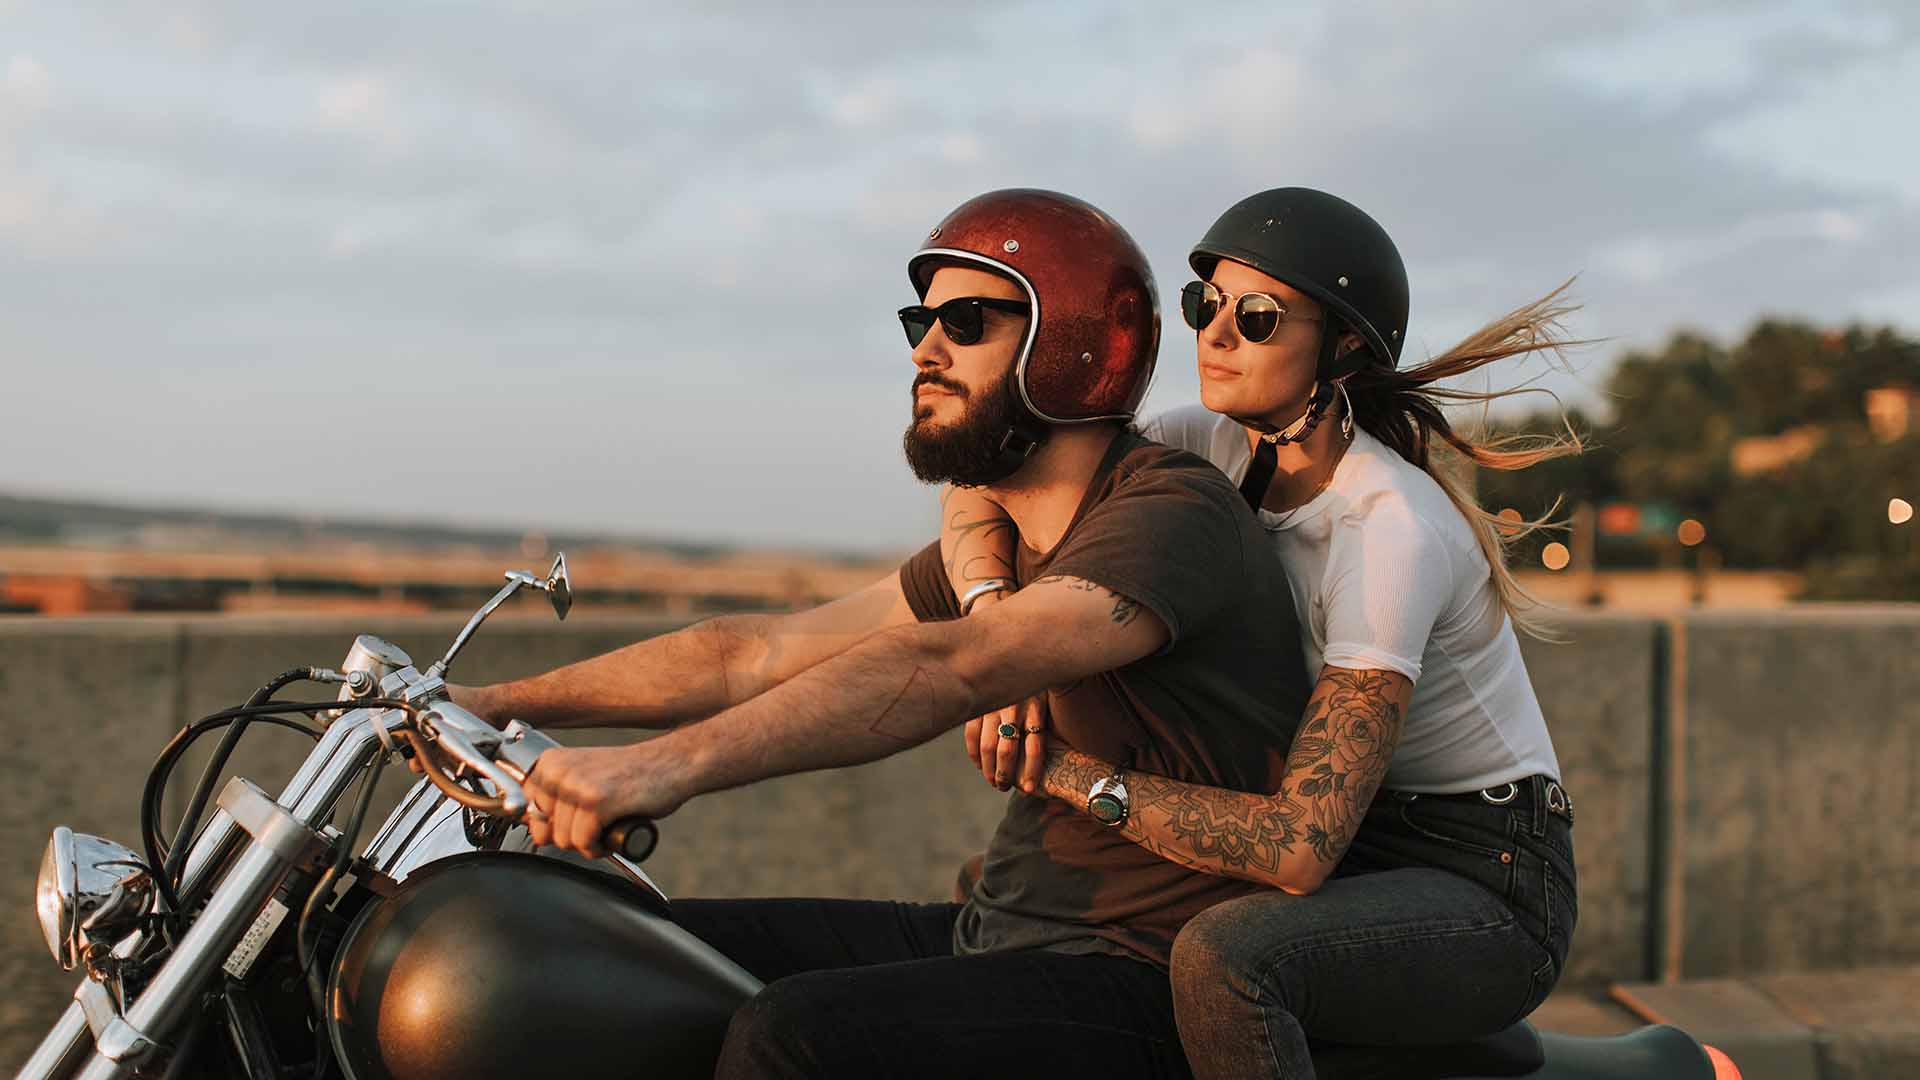 Couple on motorcycle riding down the road in the sunset